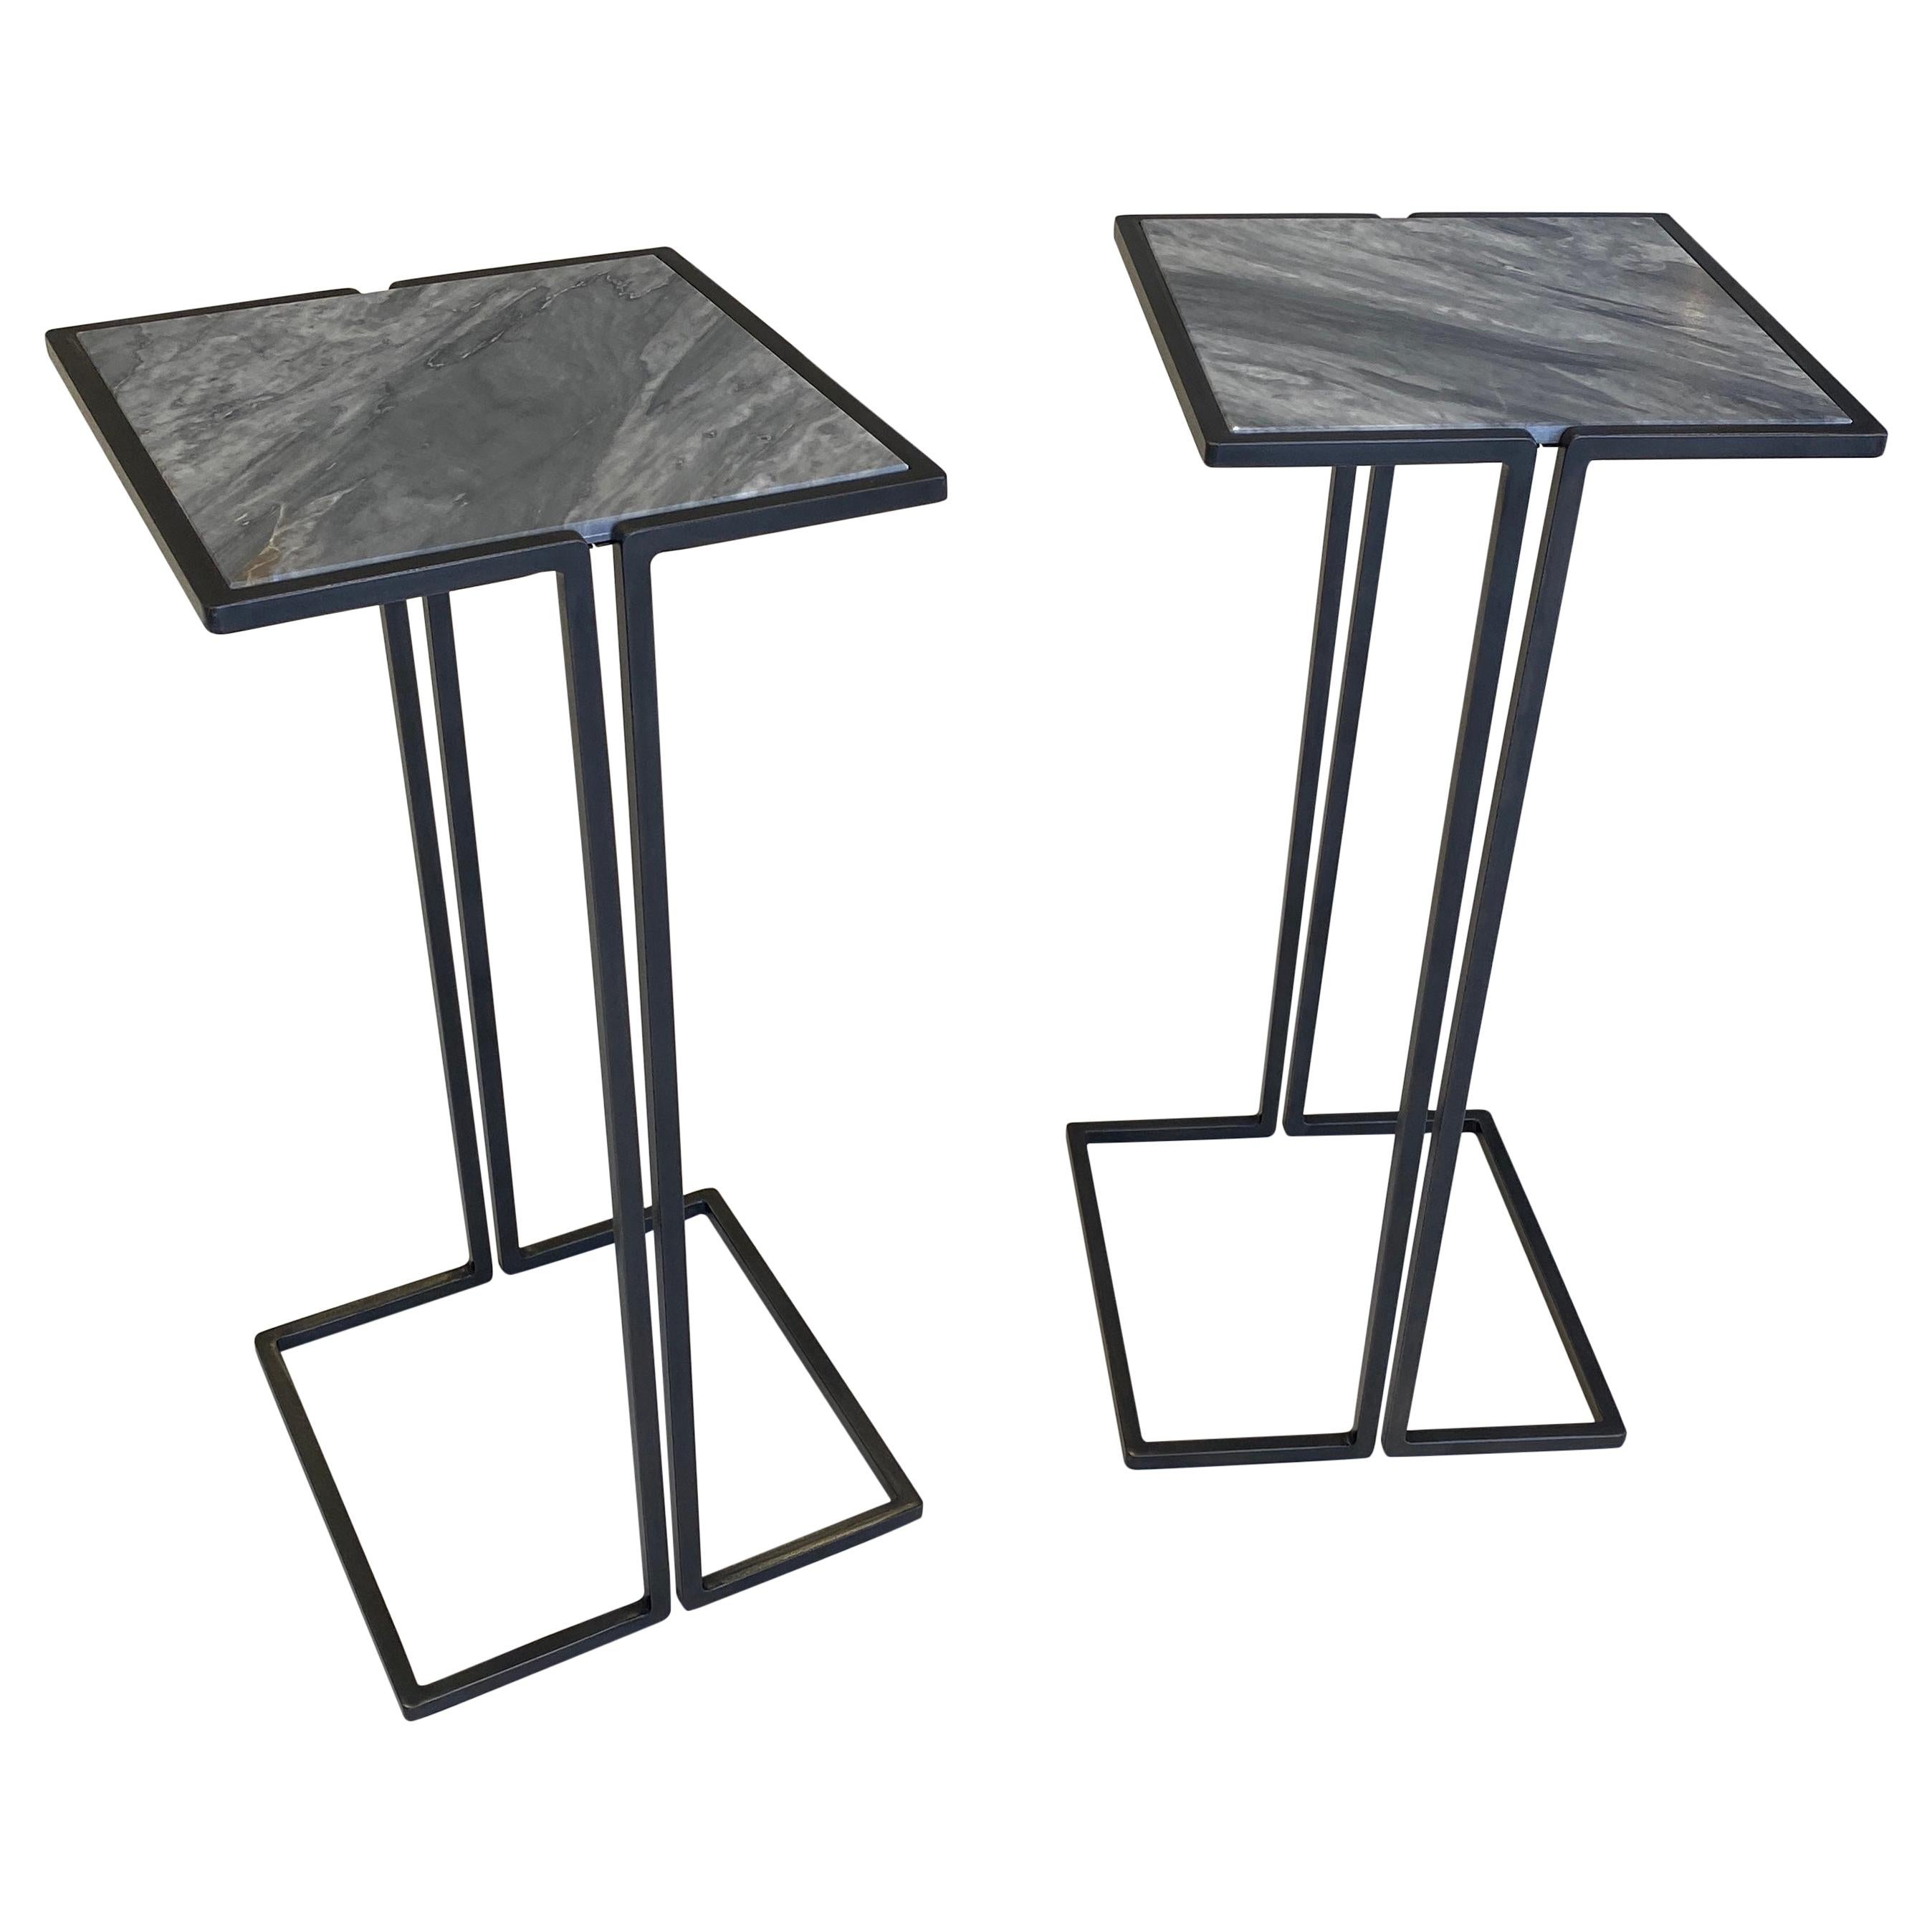 Pair of Nantes Side Tables, Model C, by Bourgeois Boheme Atelier For Sale